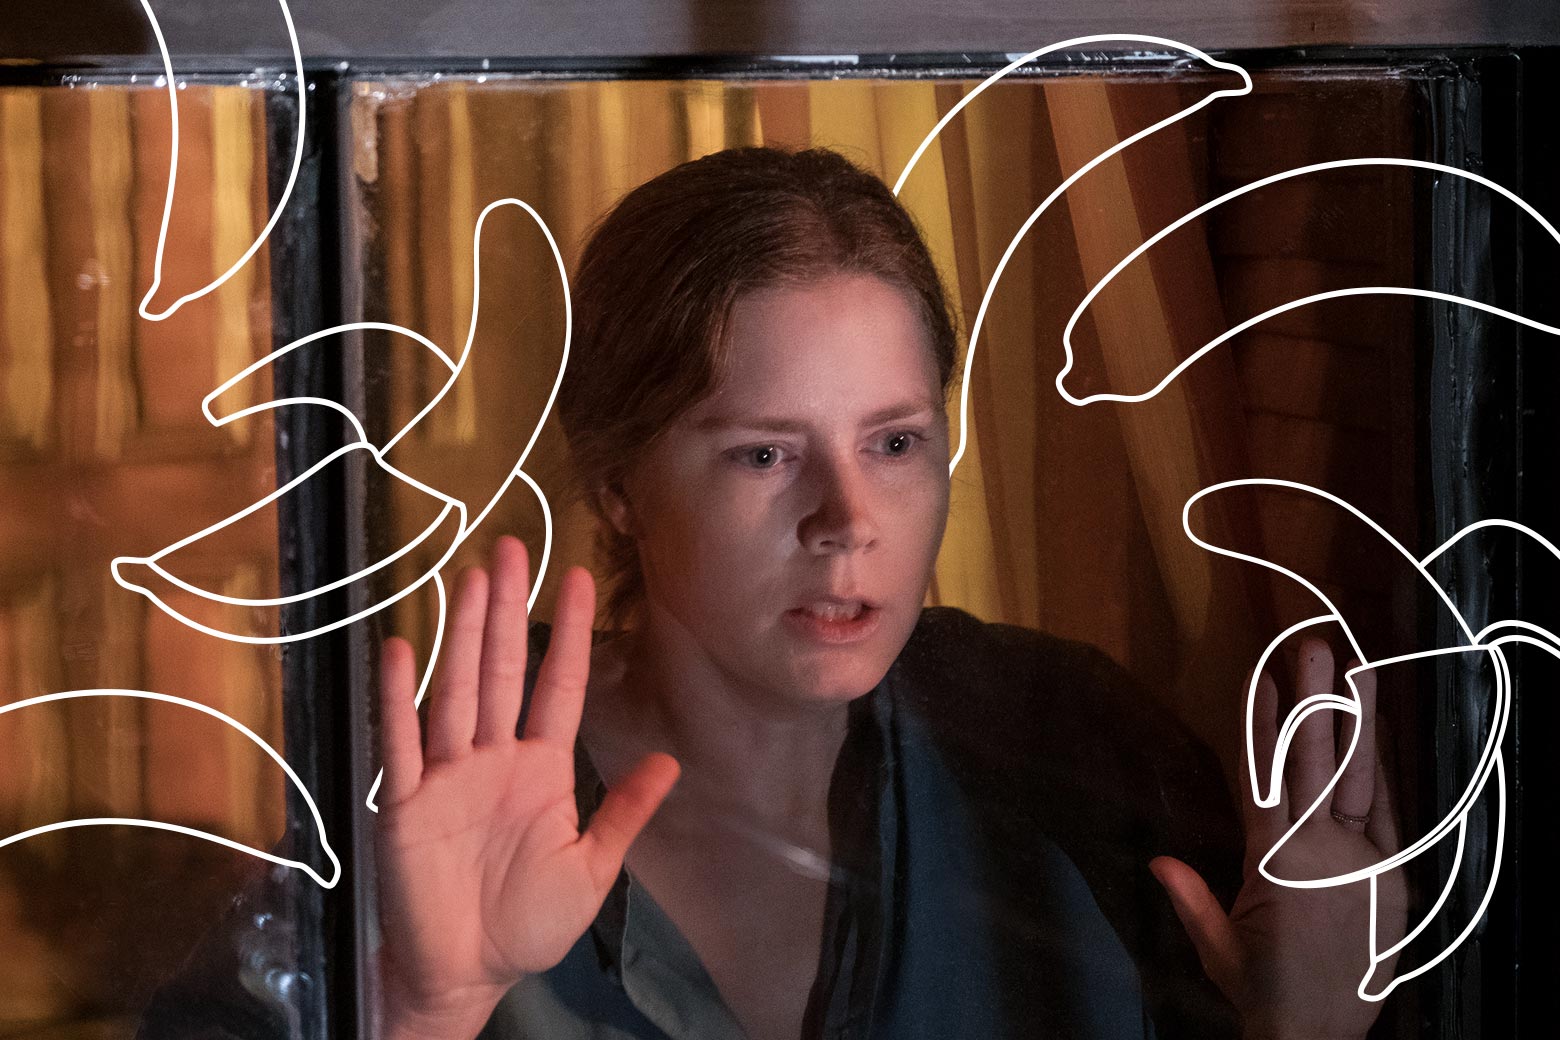 Amy Adams, framed by a window, looks exhausted and alarmed. Around her, photoshopped drawings of bananas.